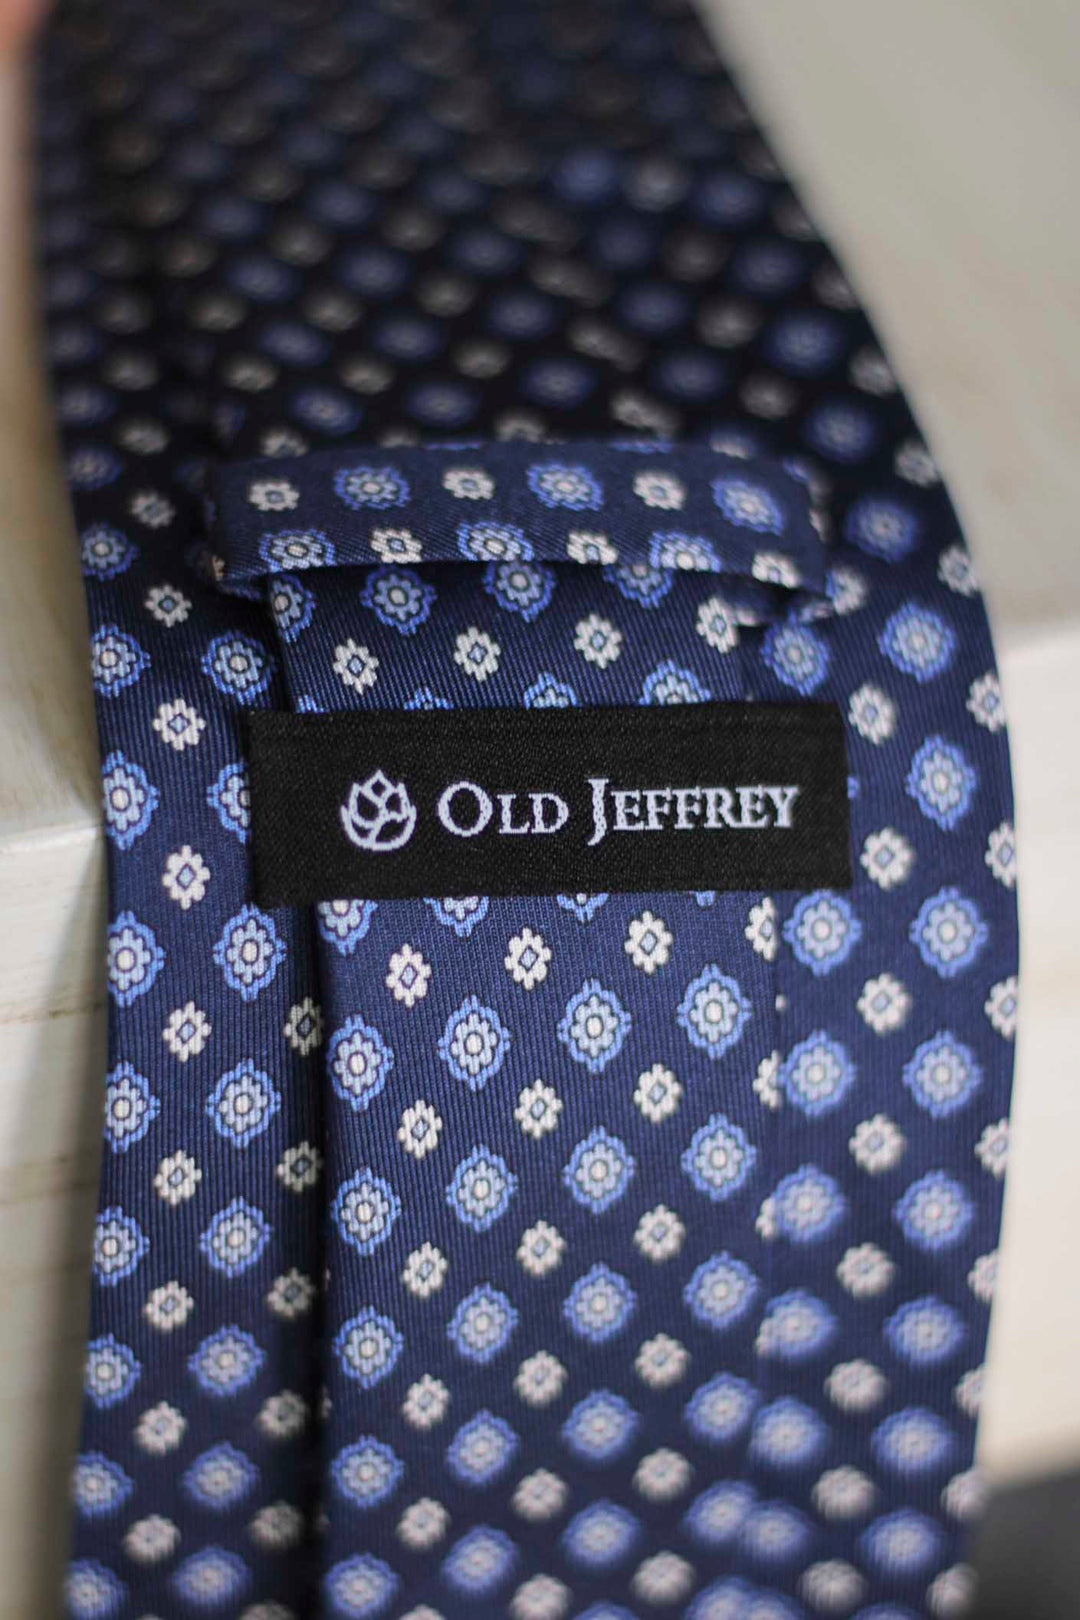 Navy Blue Silk Tie with Daisies in Light Blue and White Tones